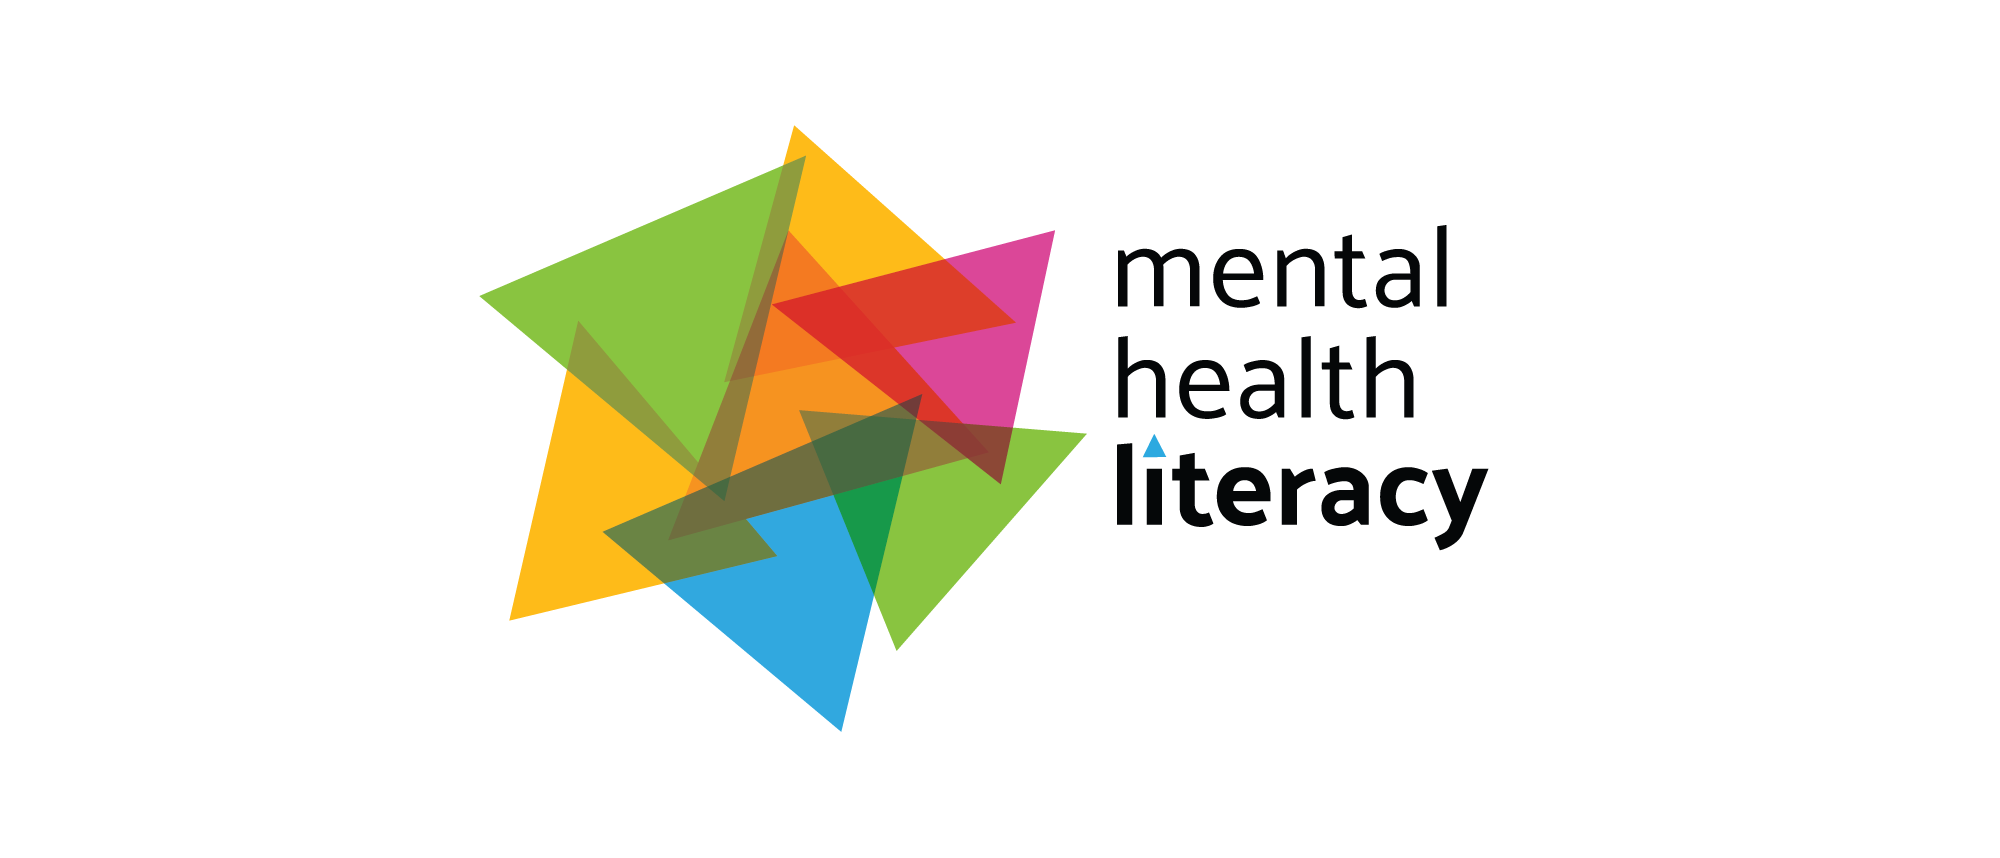 Multicolour logo made with triangles for mental health literacy